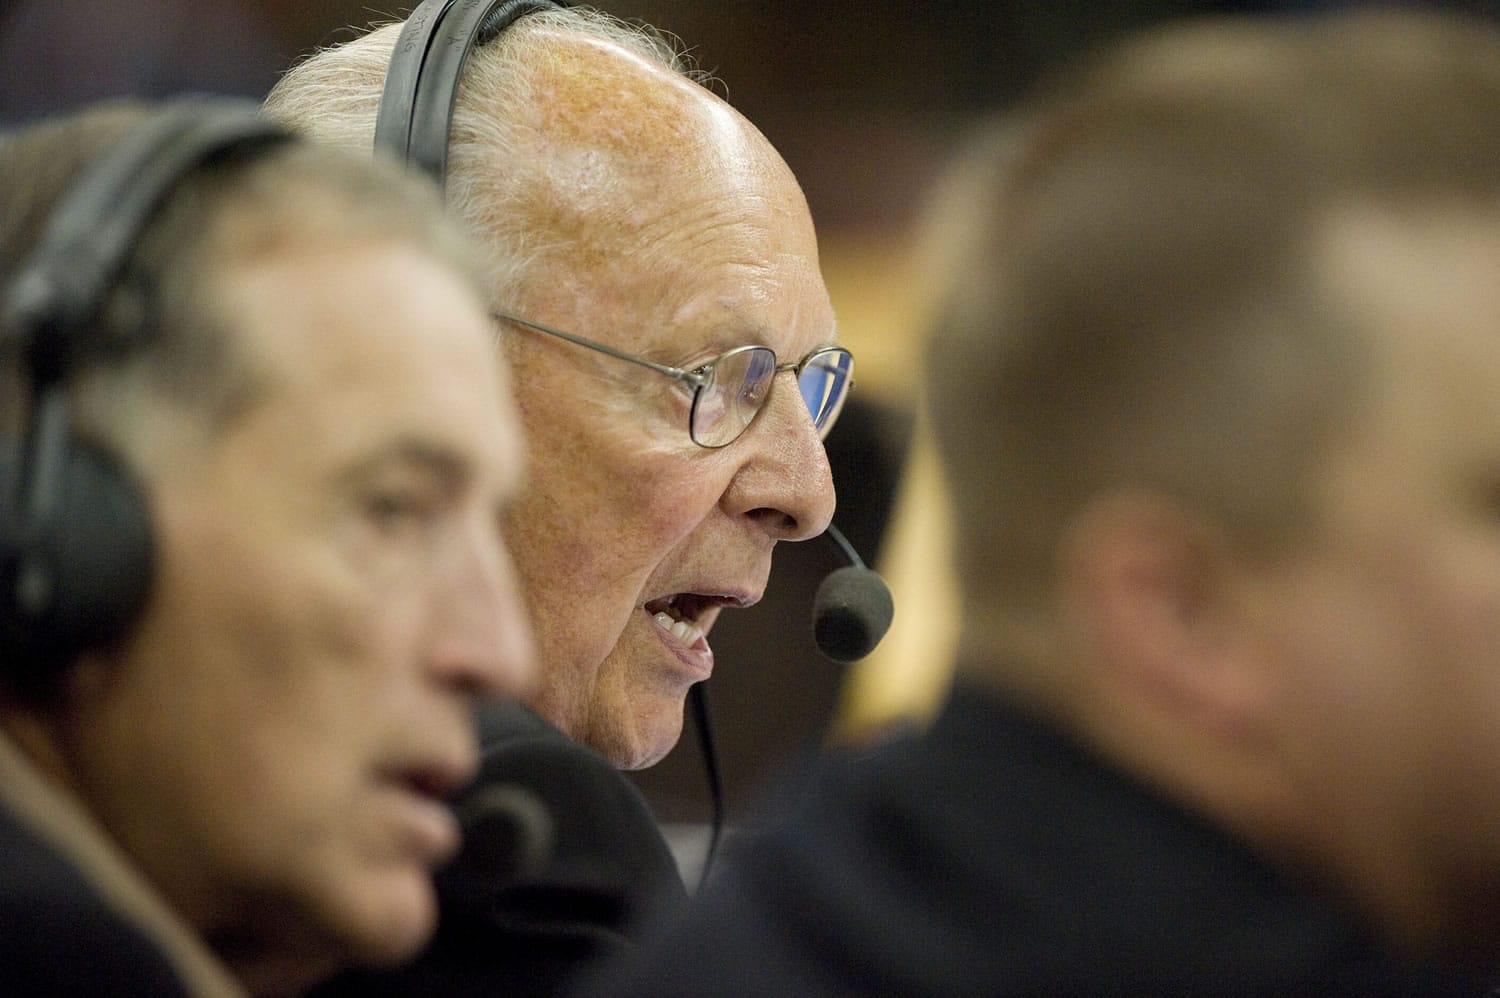 Portland radio legend Bill Schonely returned to the announcer's booth for a Blazers preseason game in 2009.